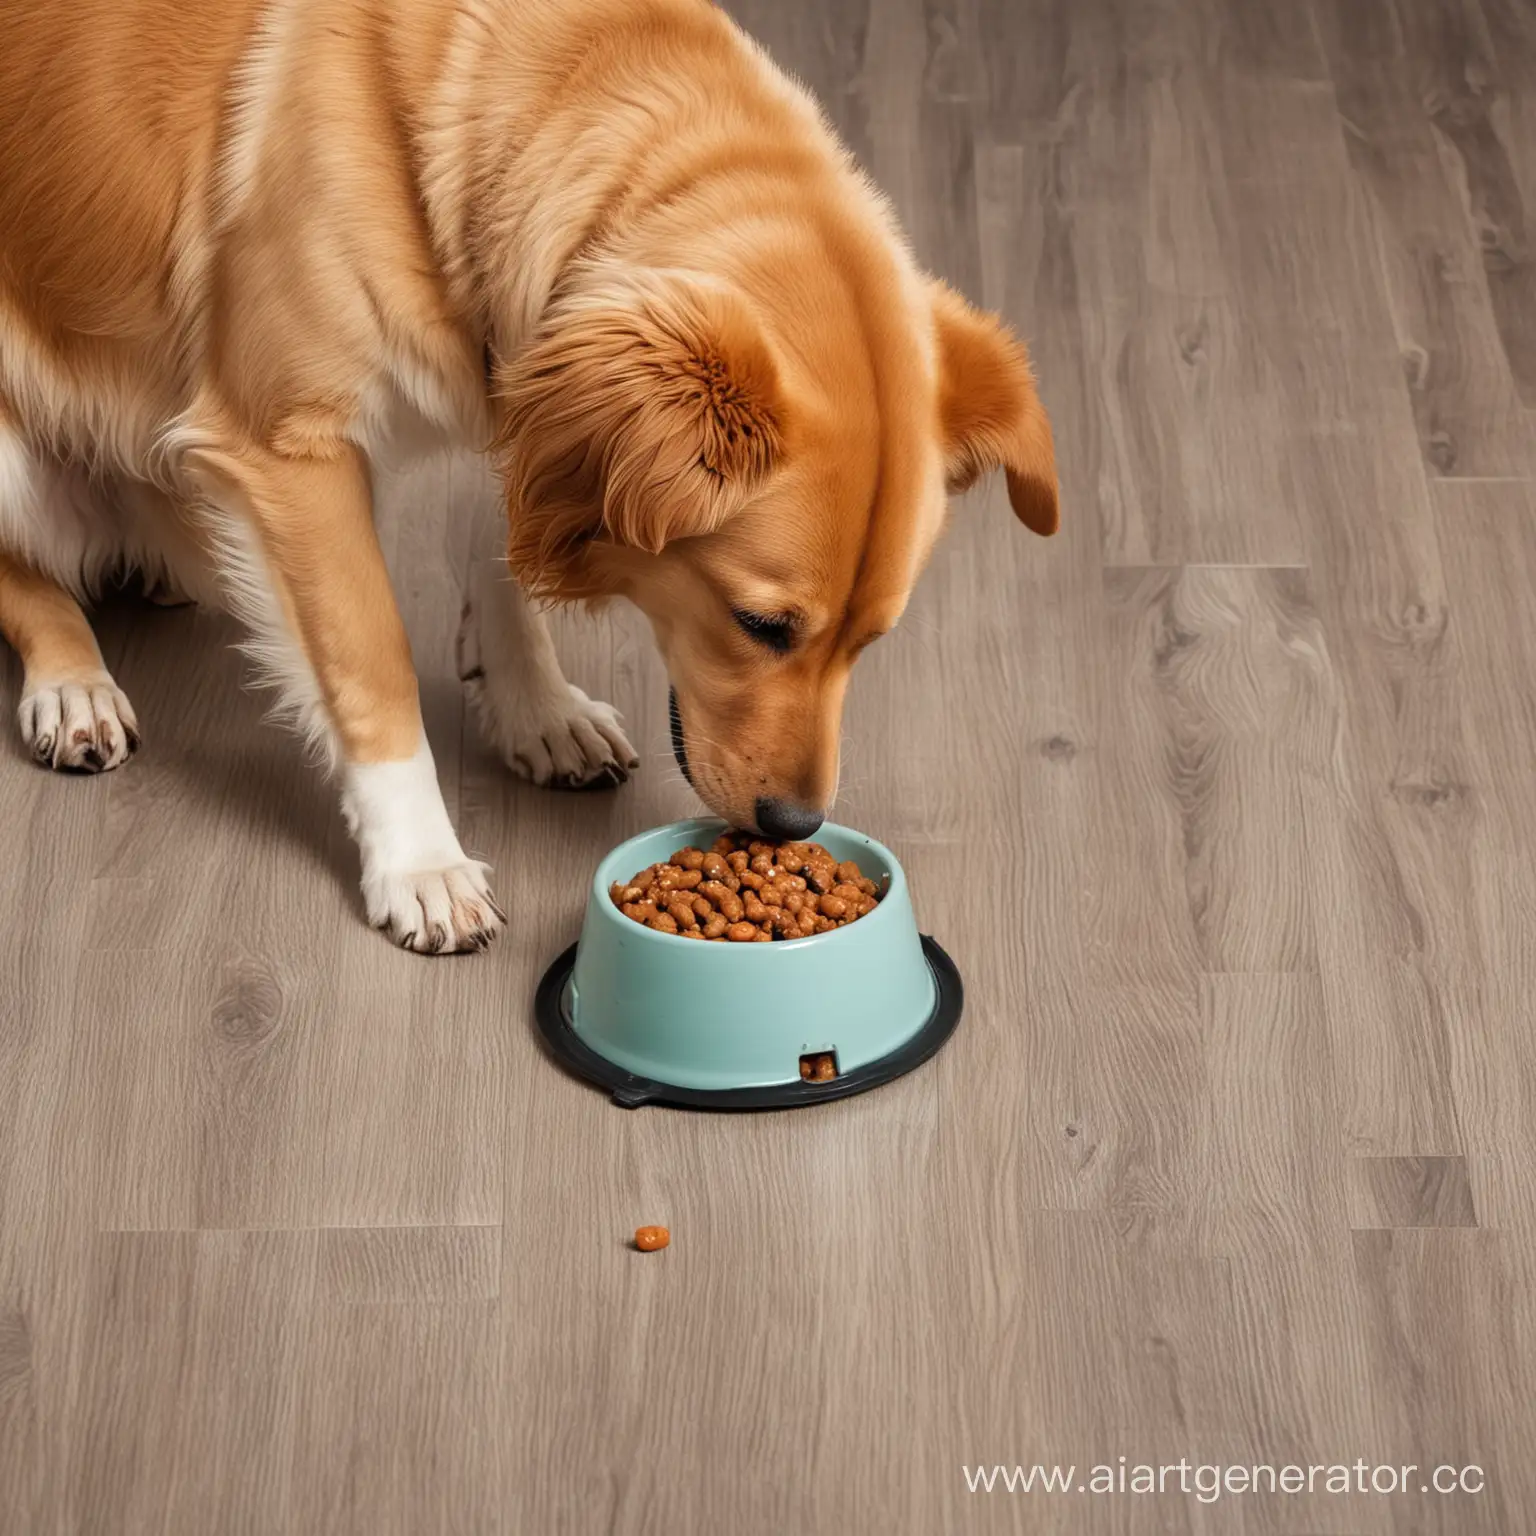 Closeup-Dog-Eating-from-Bowl-on-Floor